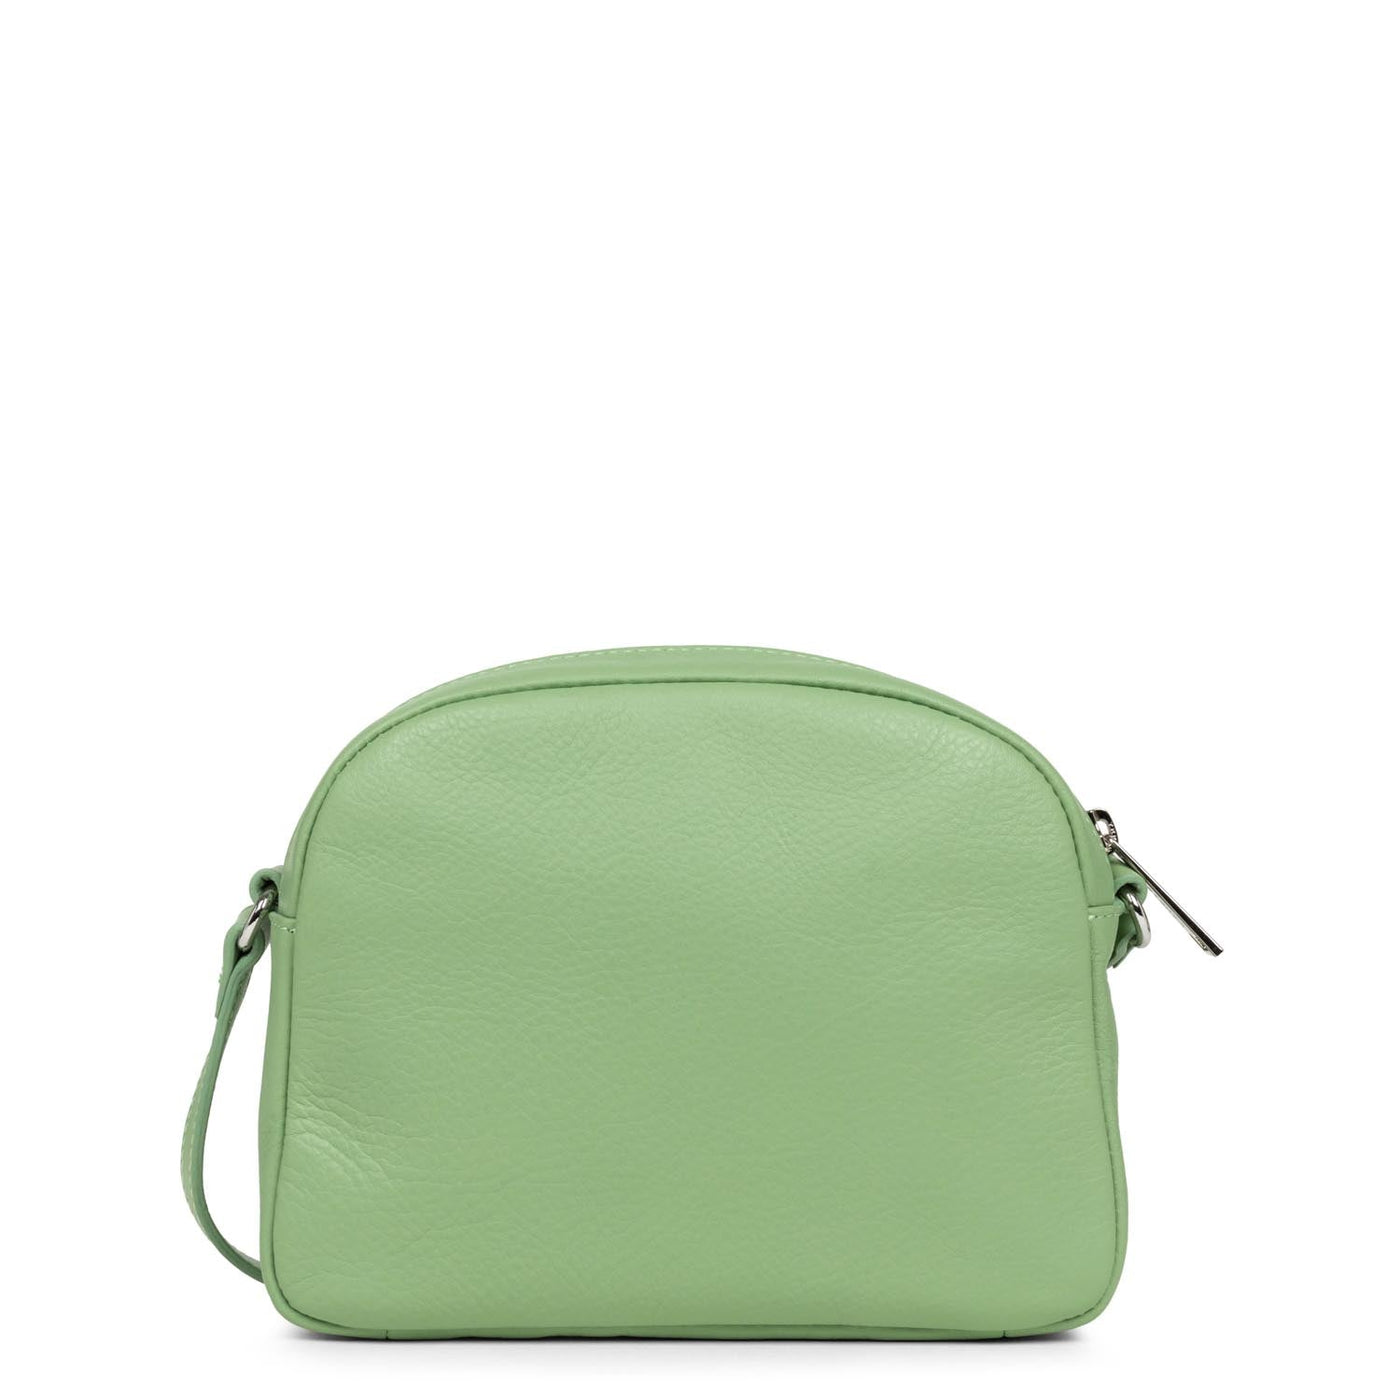 reporter bag - soft melody #couleur_jade